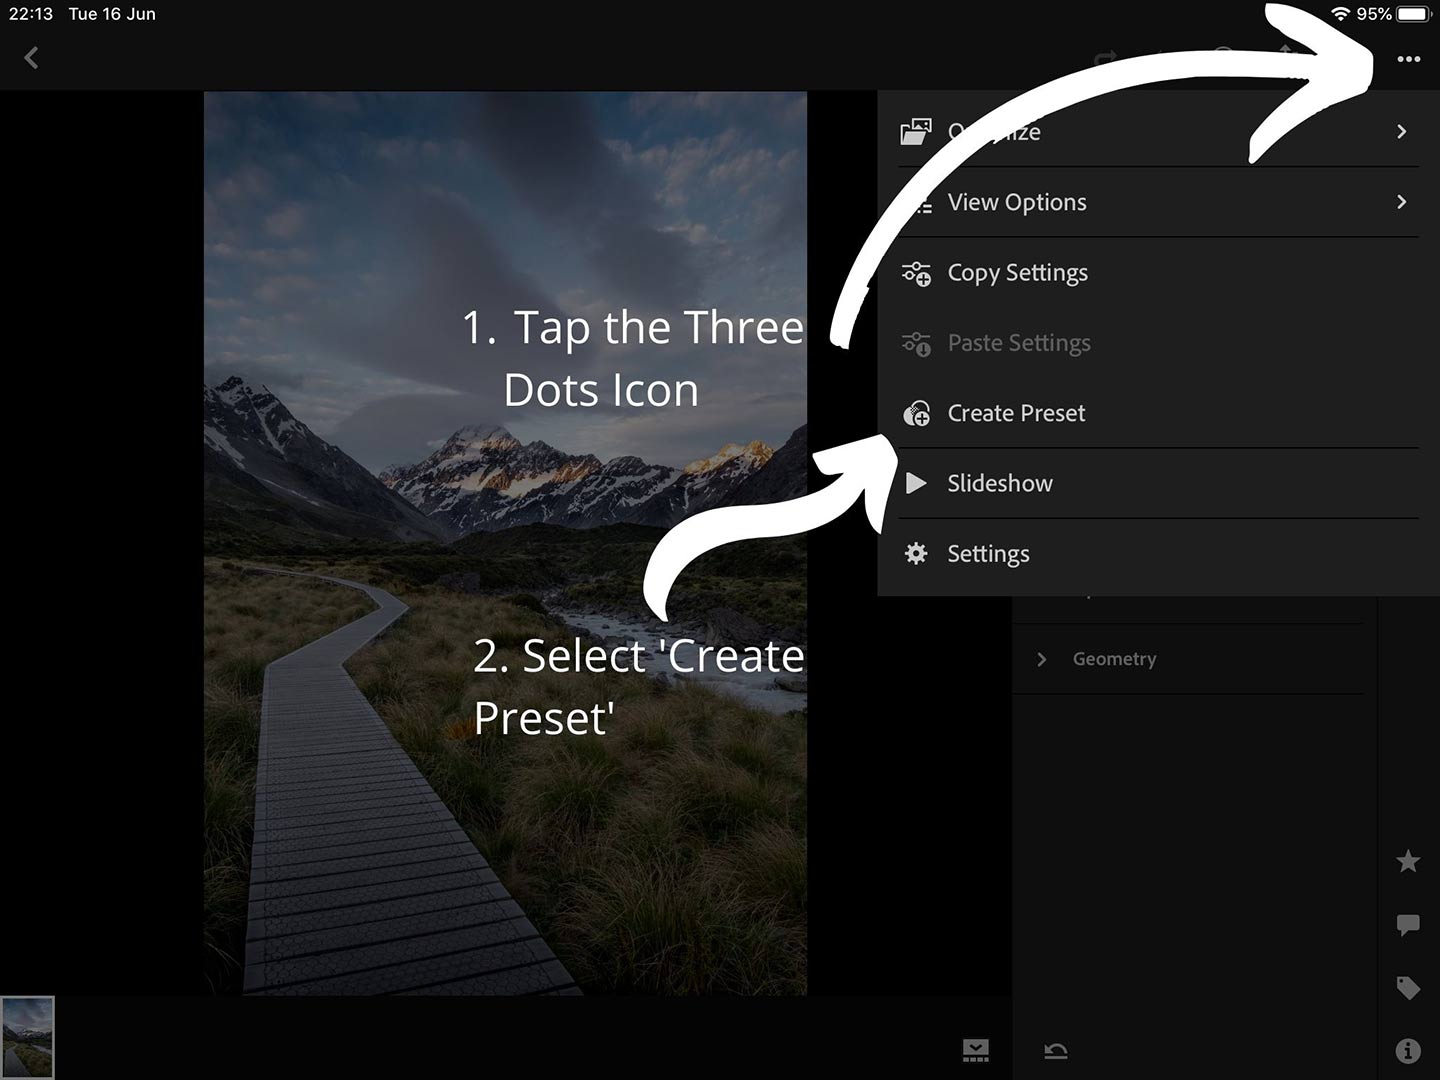 This printscreen demonstrates part 3/4 of installing your new presets using the mobile application something we go into detail during this Lightroom presets guide.